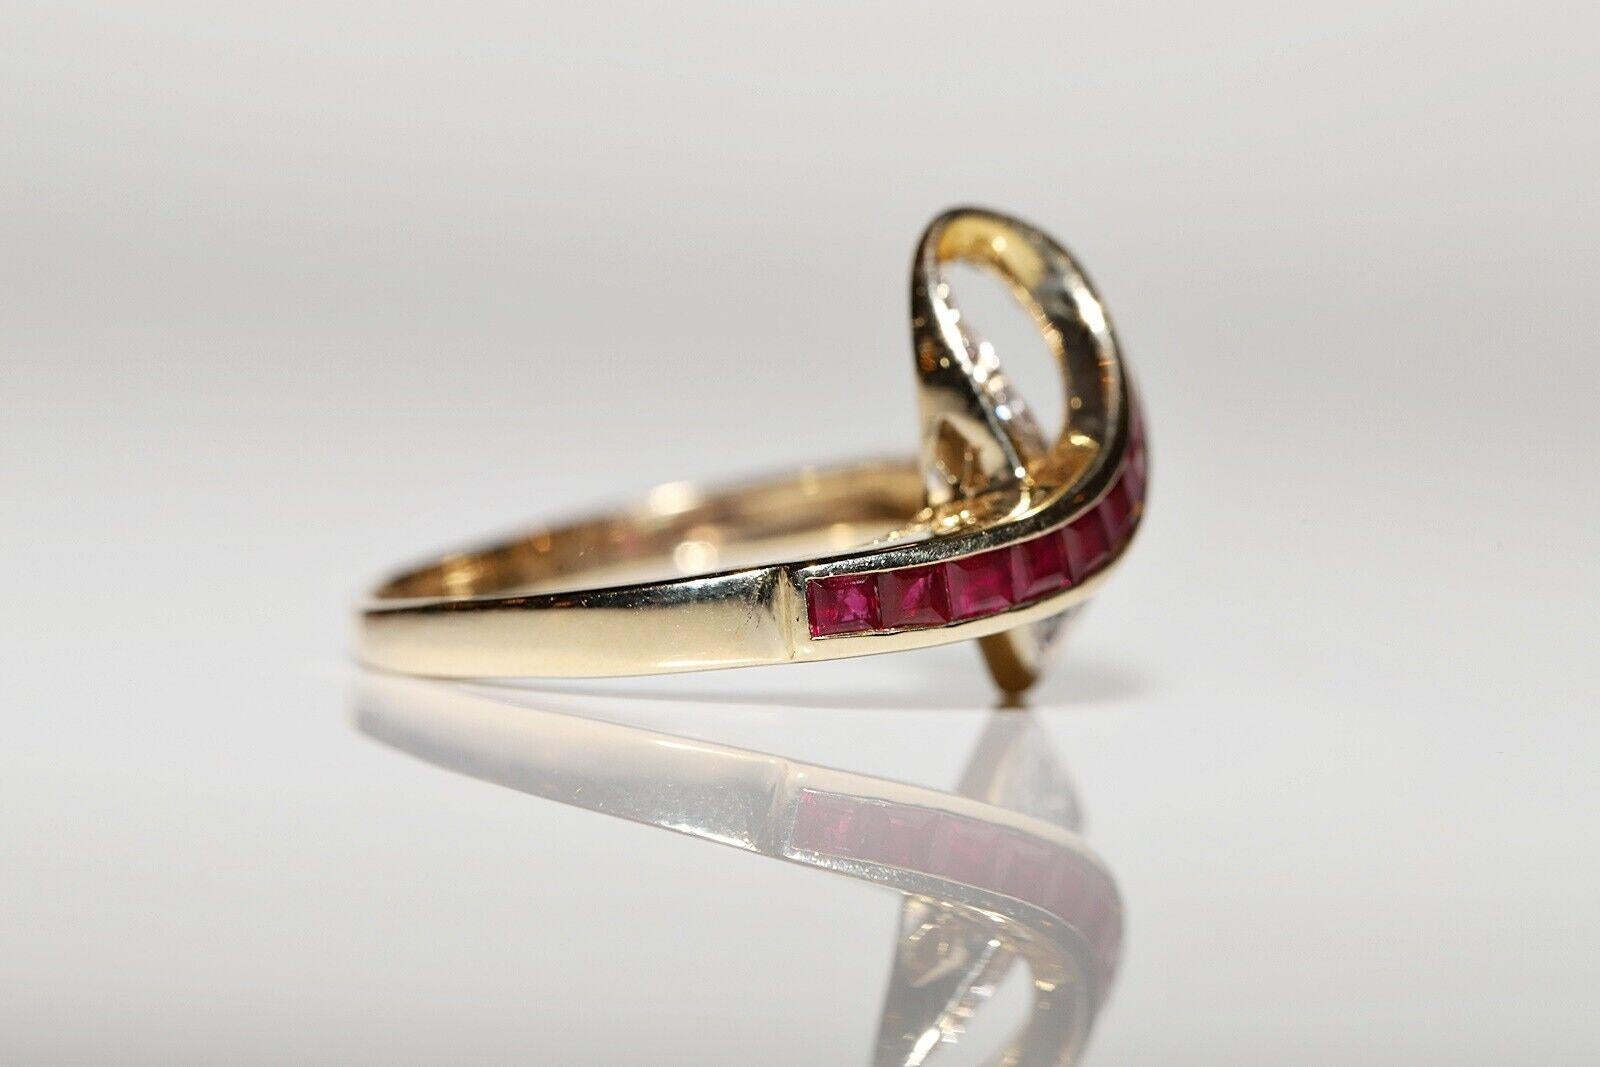 Vintage Circa 1970s 14k Gold Natural Diamond And Caliber Ruby Decorated Ring In Good Condition For Sale In Fatih/İstanbul, 34